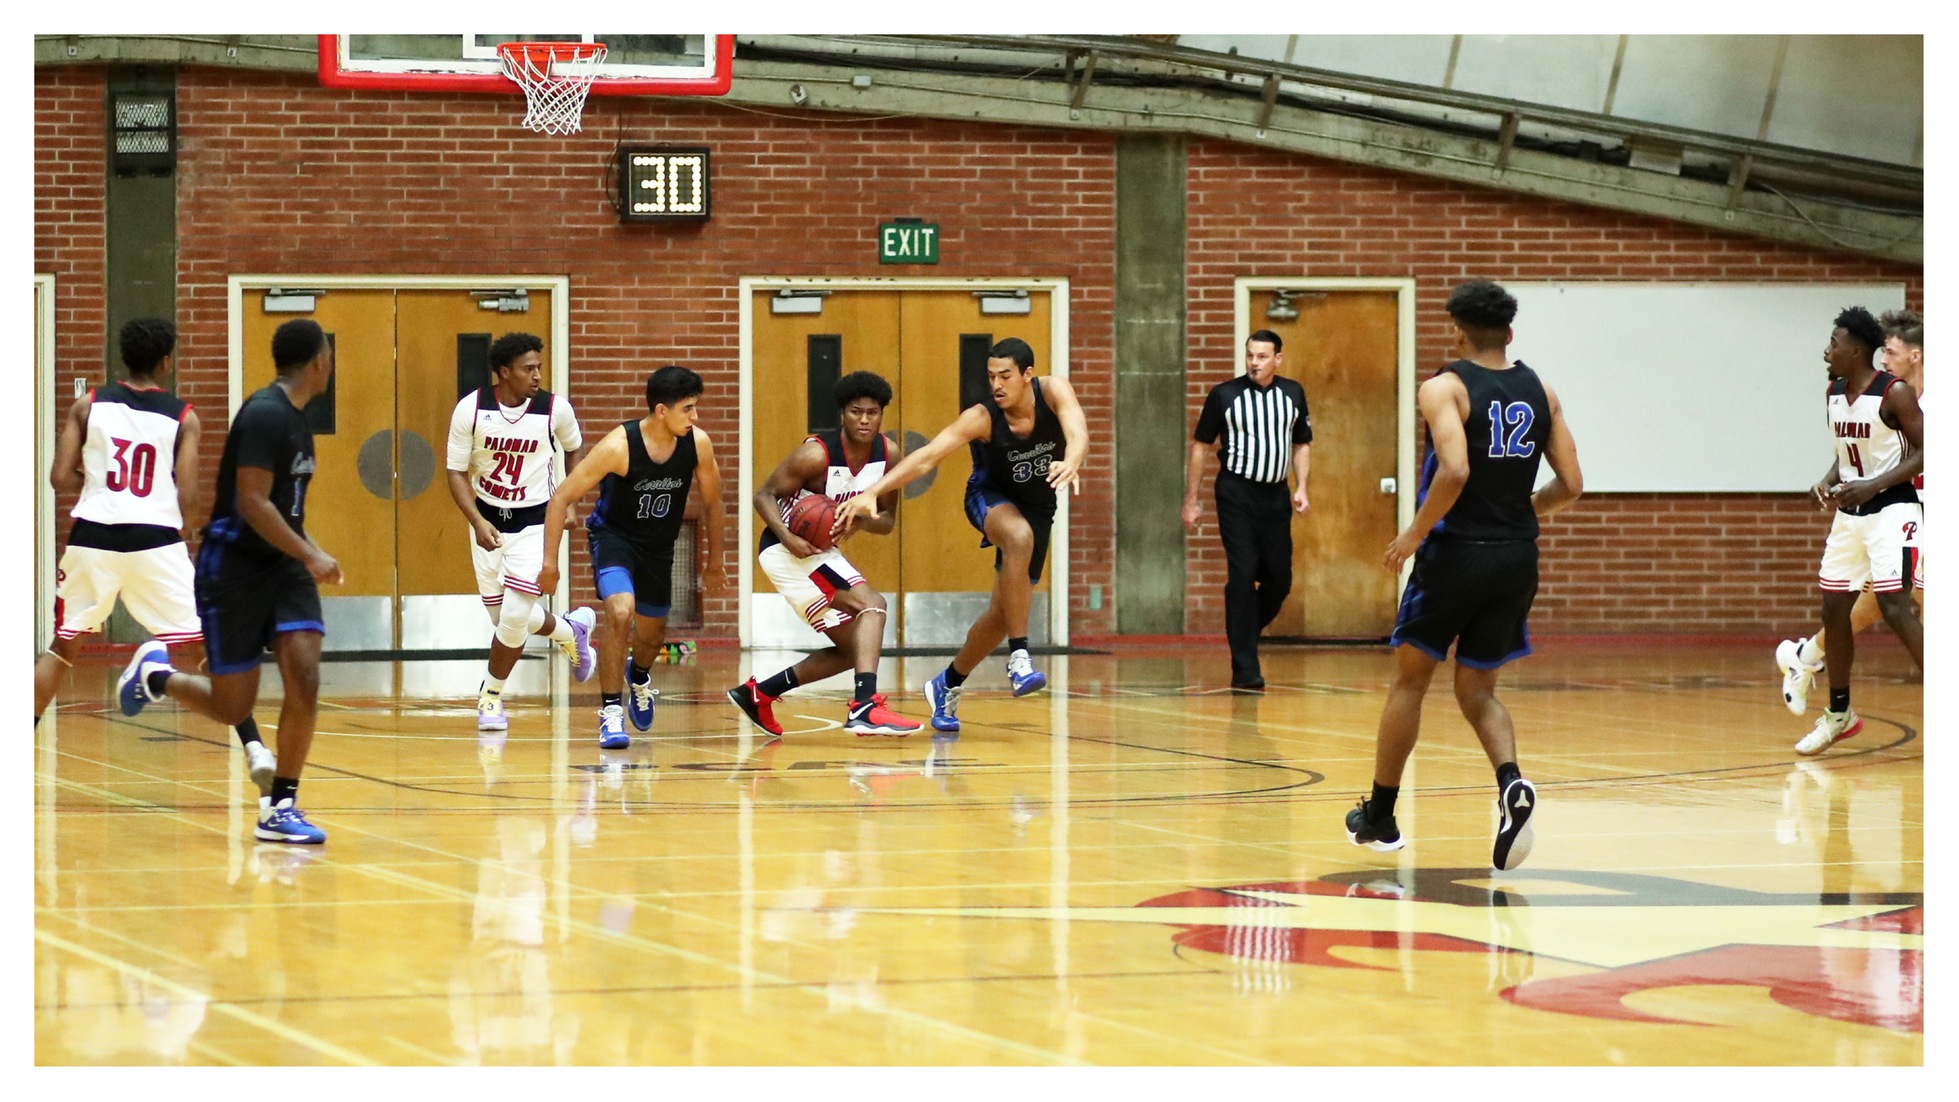 Men's basketball extended their win streak to eight Friday night. Photo by Hugh Cox (taken 11/20).